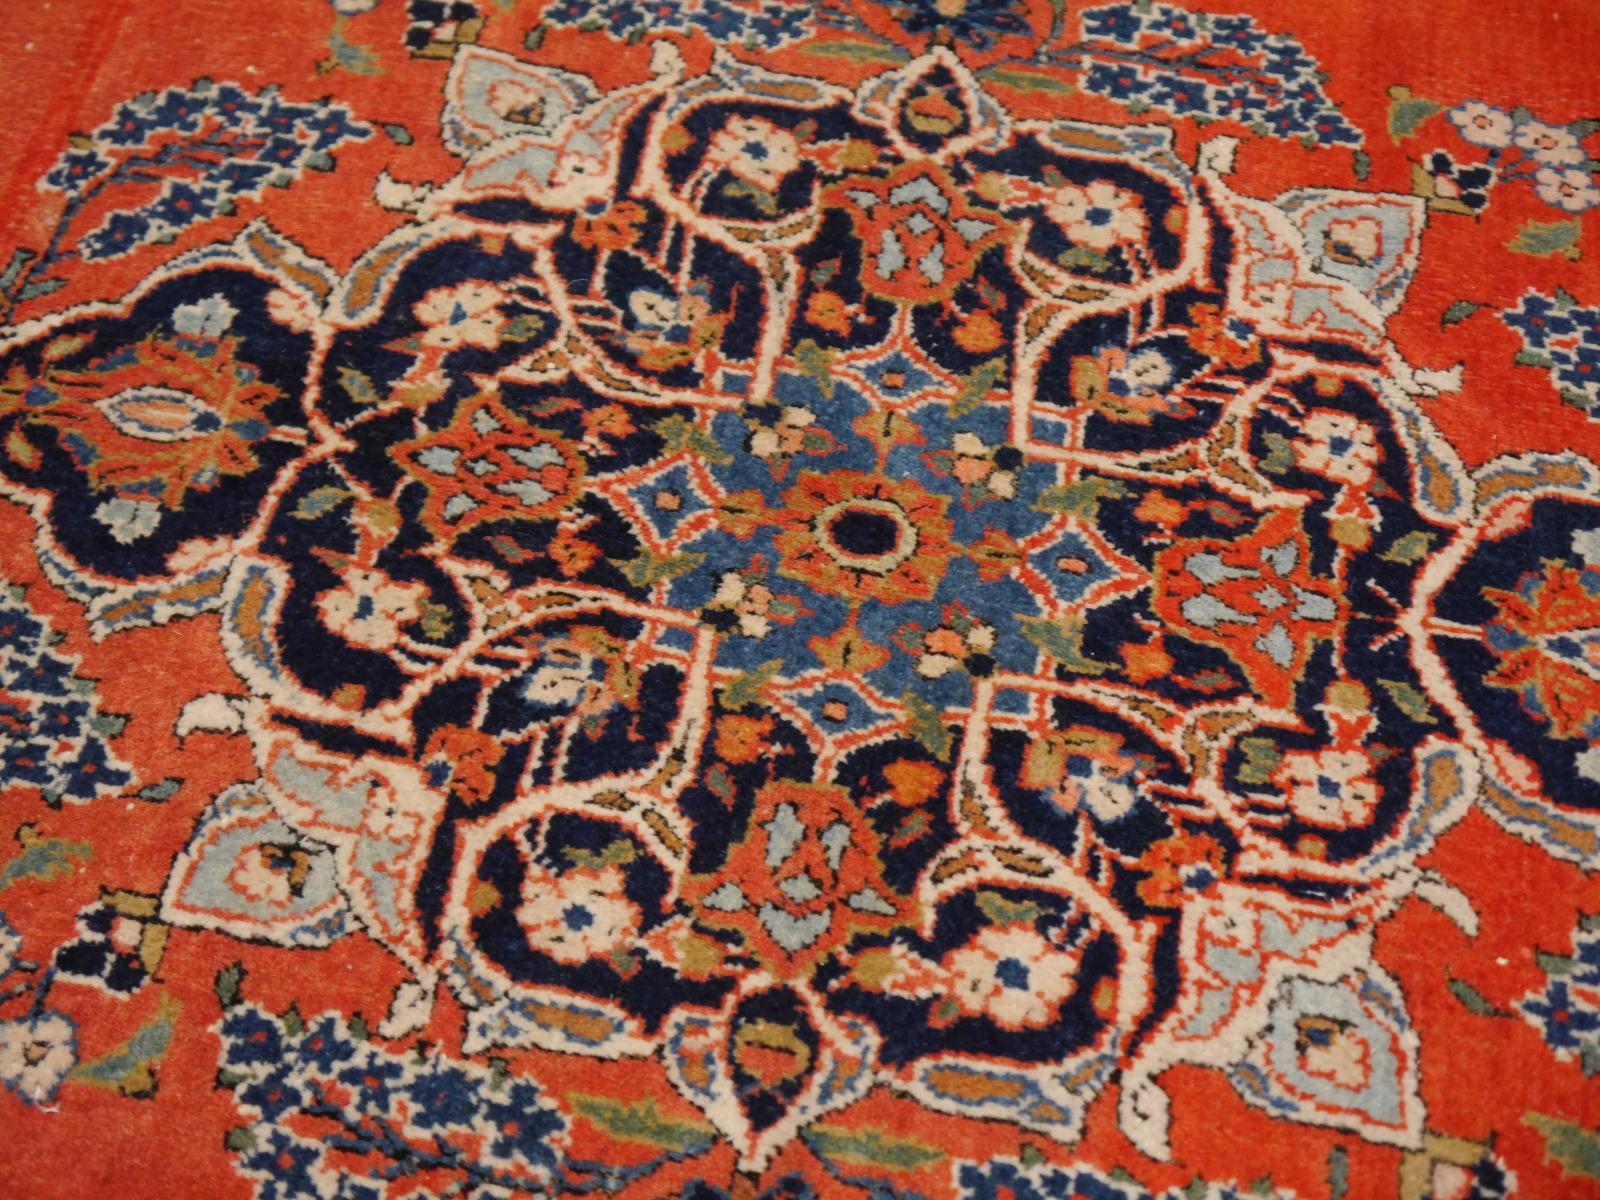 Kashan vintage rug, hand-knotted in salmon and blue - Djoharian Collection For Sale 4